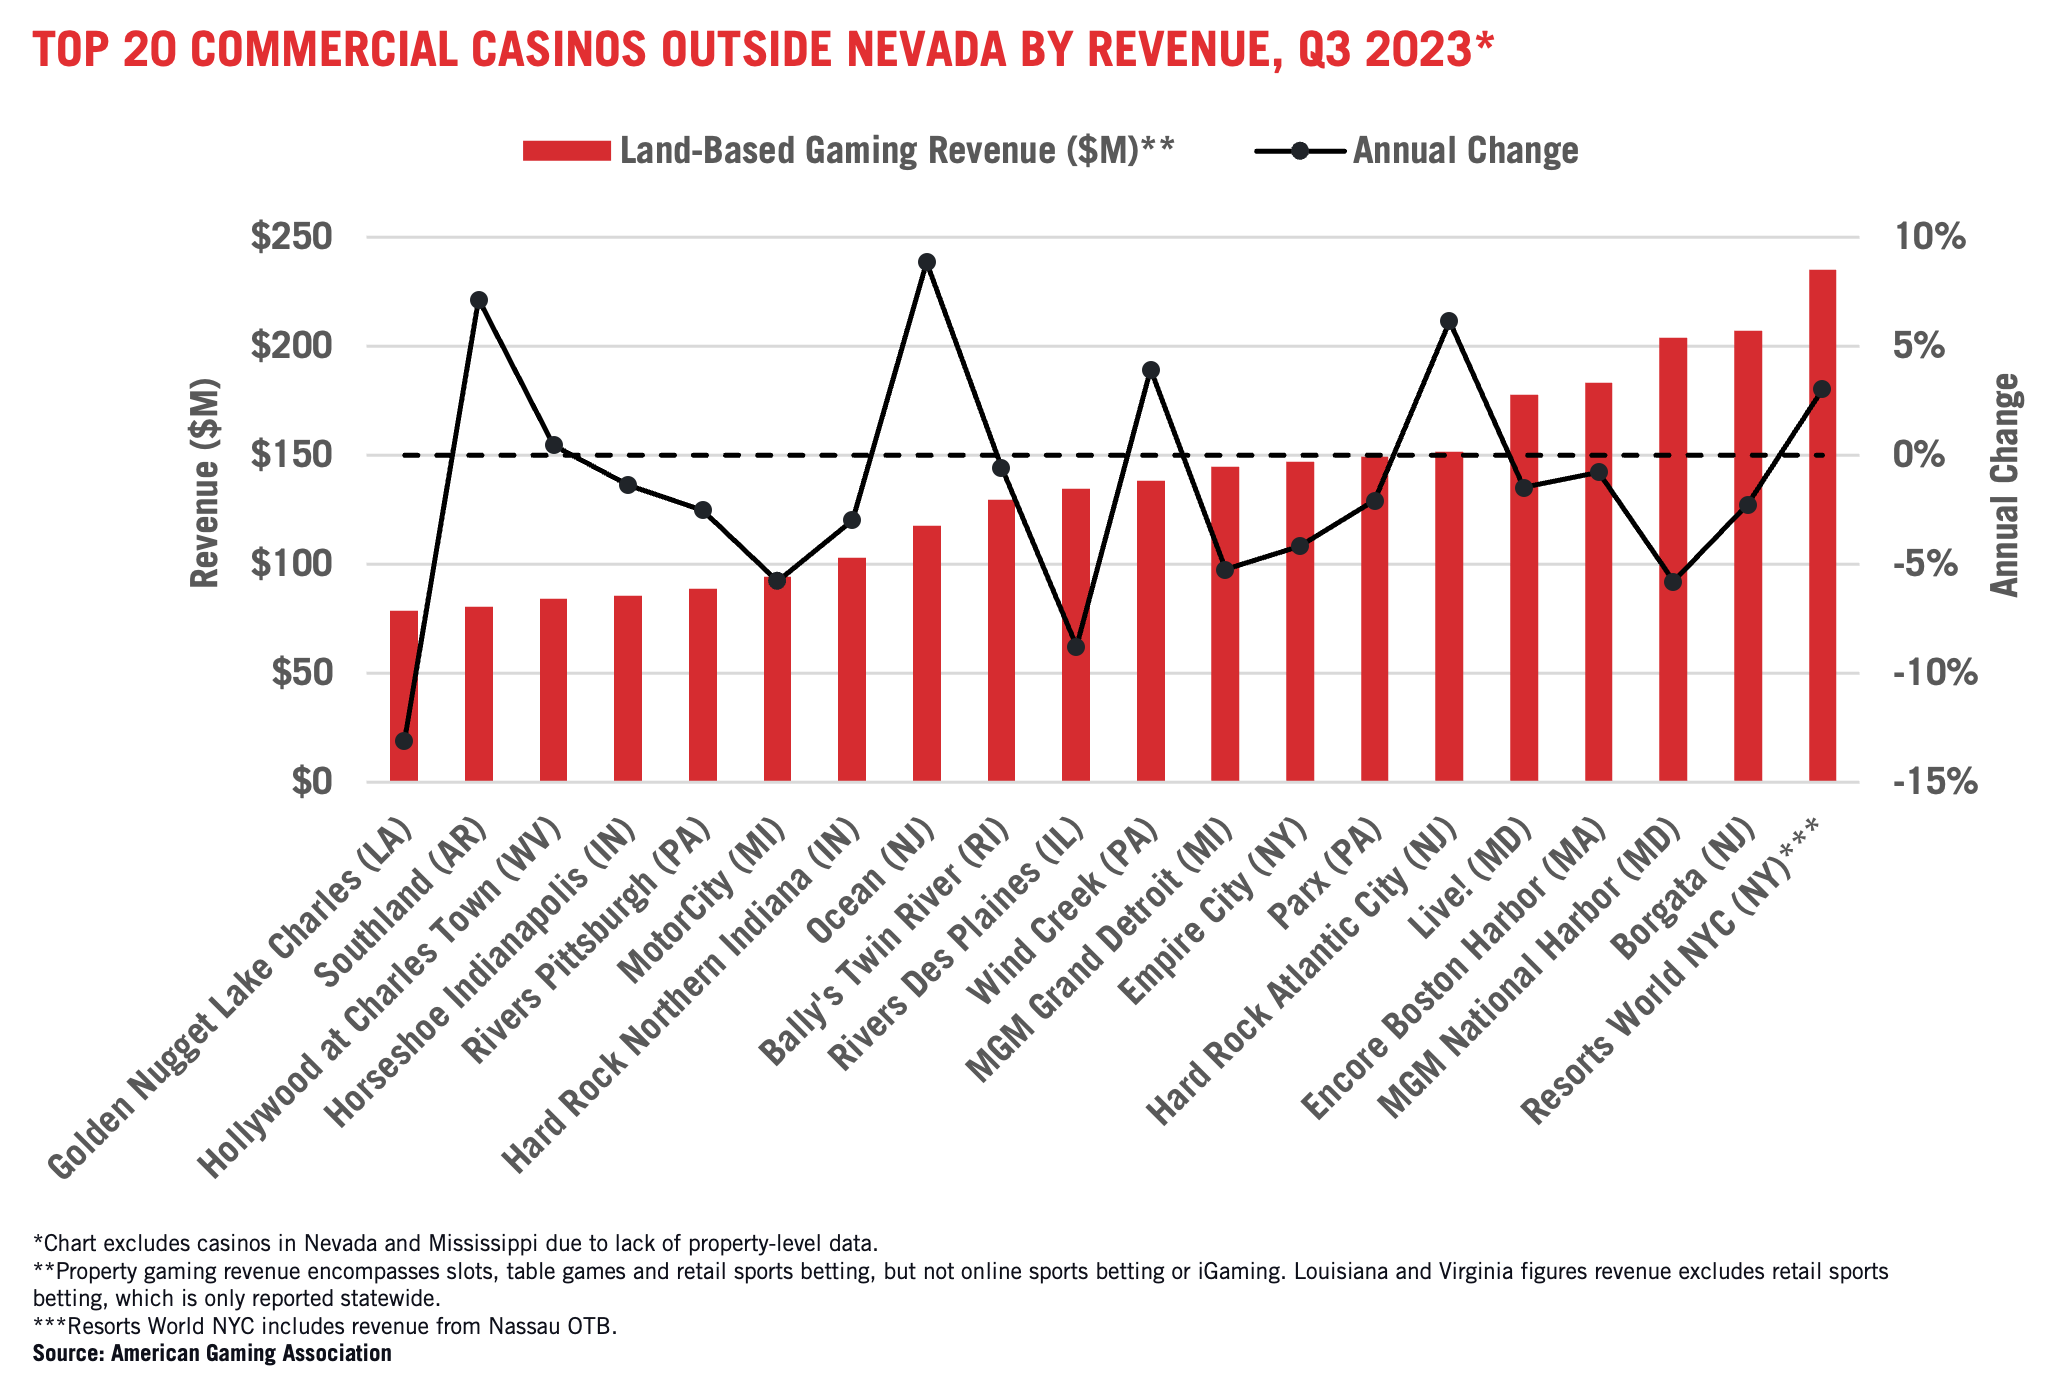 Experience levels of gaming jobs in 2022 revealed